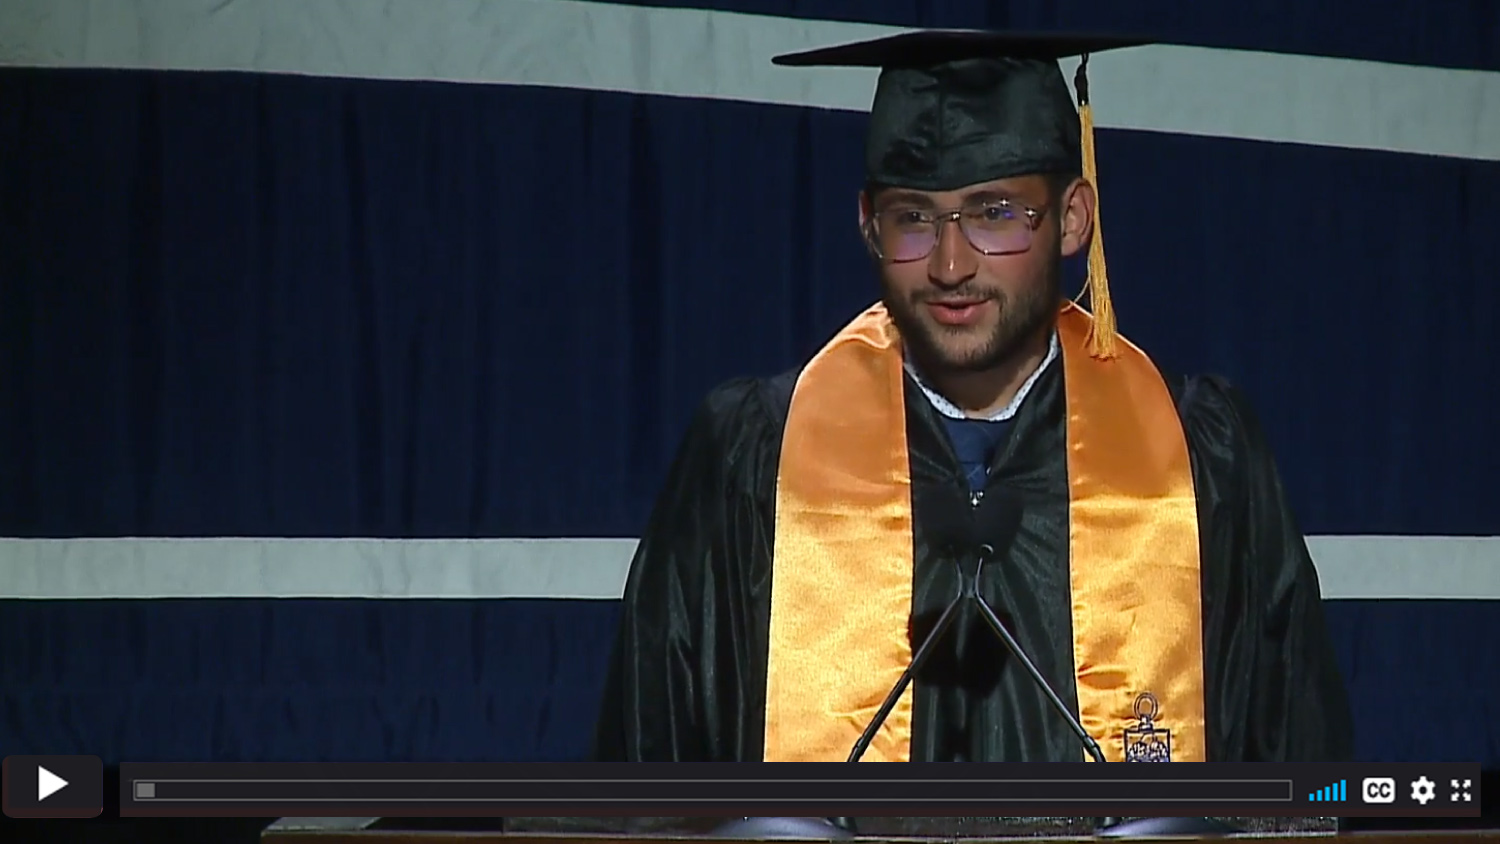 Luciano in cap and gown at the podium.